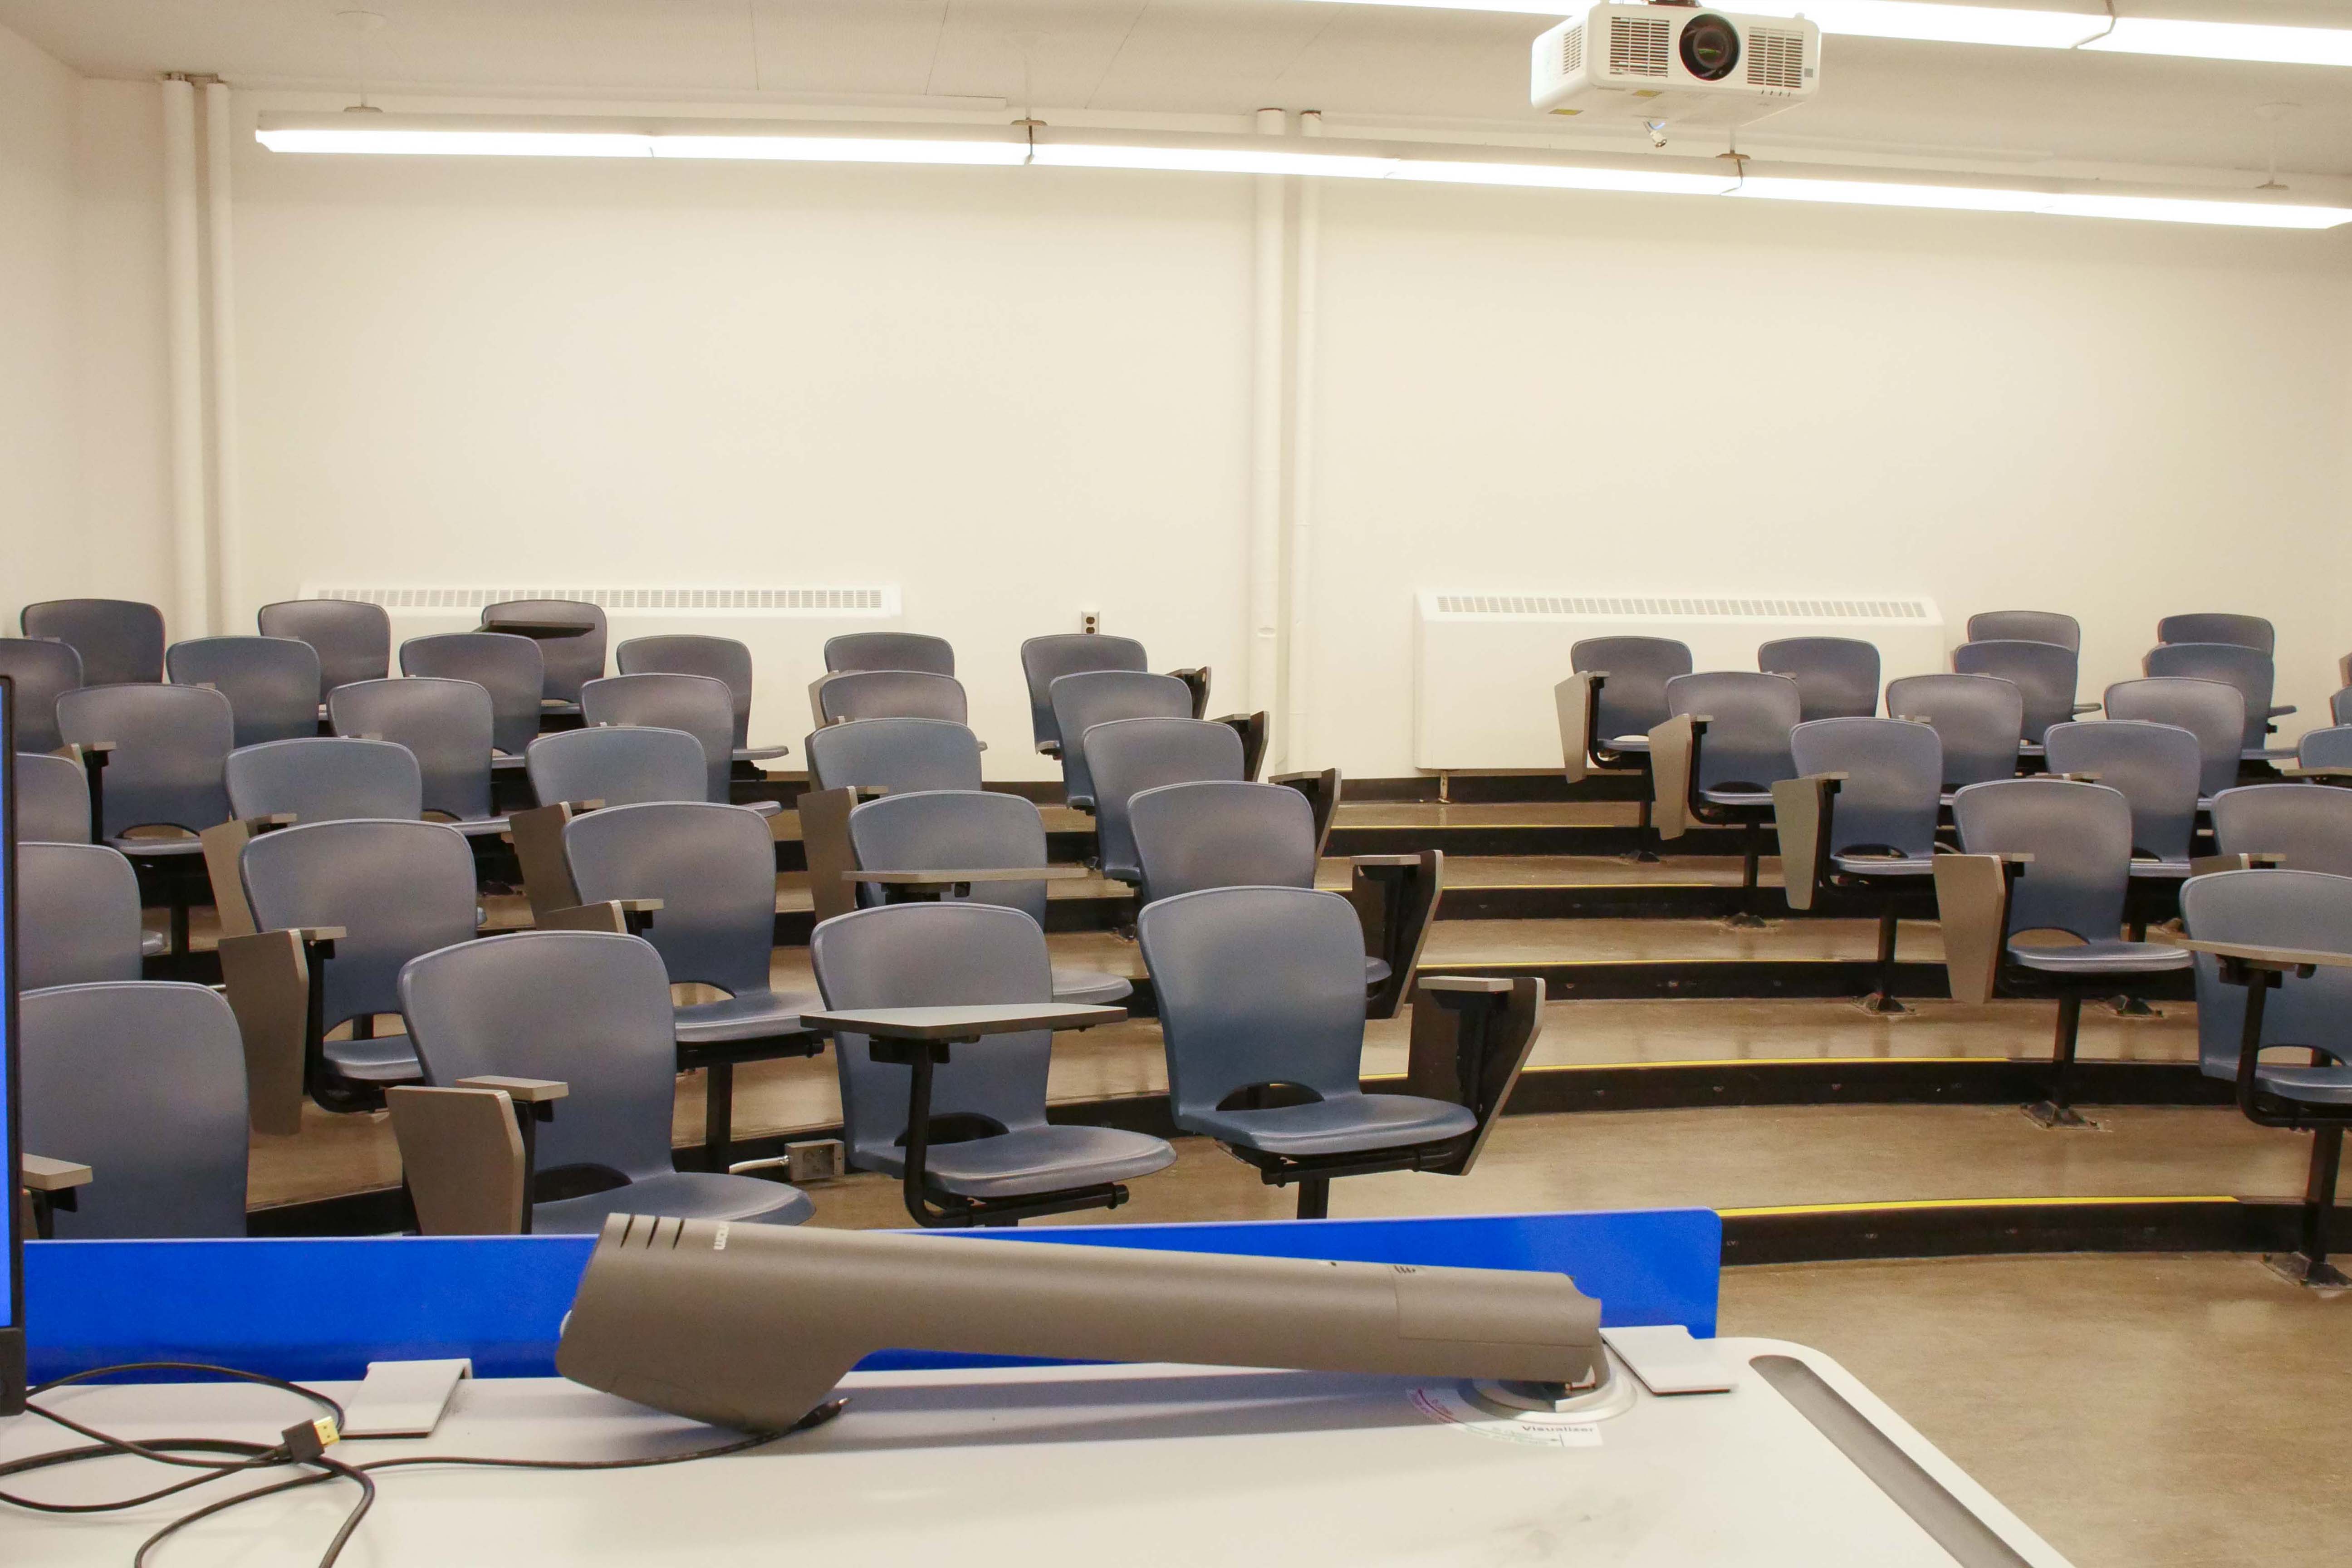 Instructor view of classroom in Kerr Hall following renovations